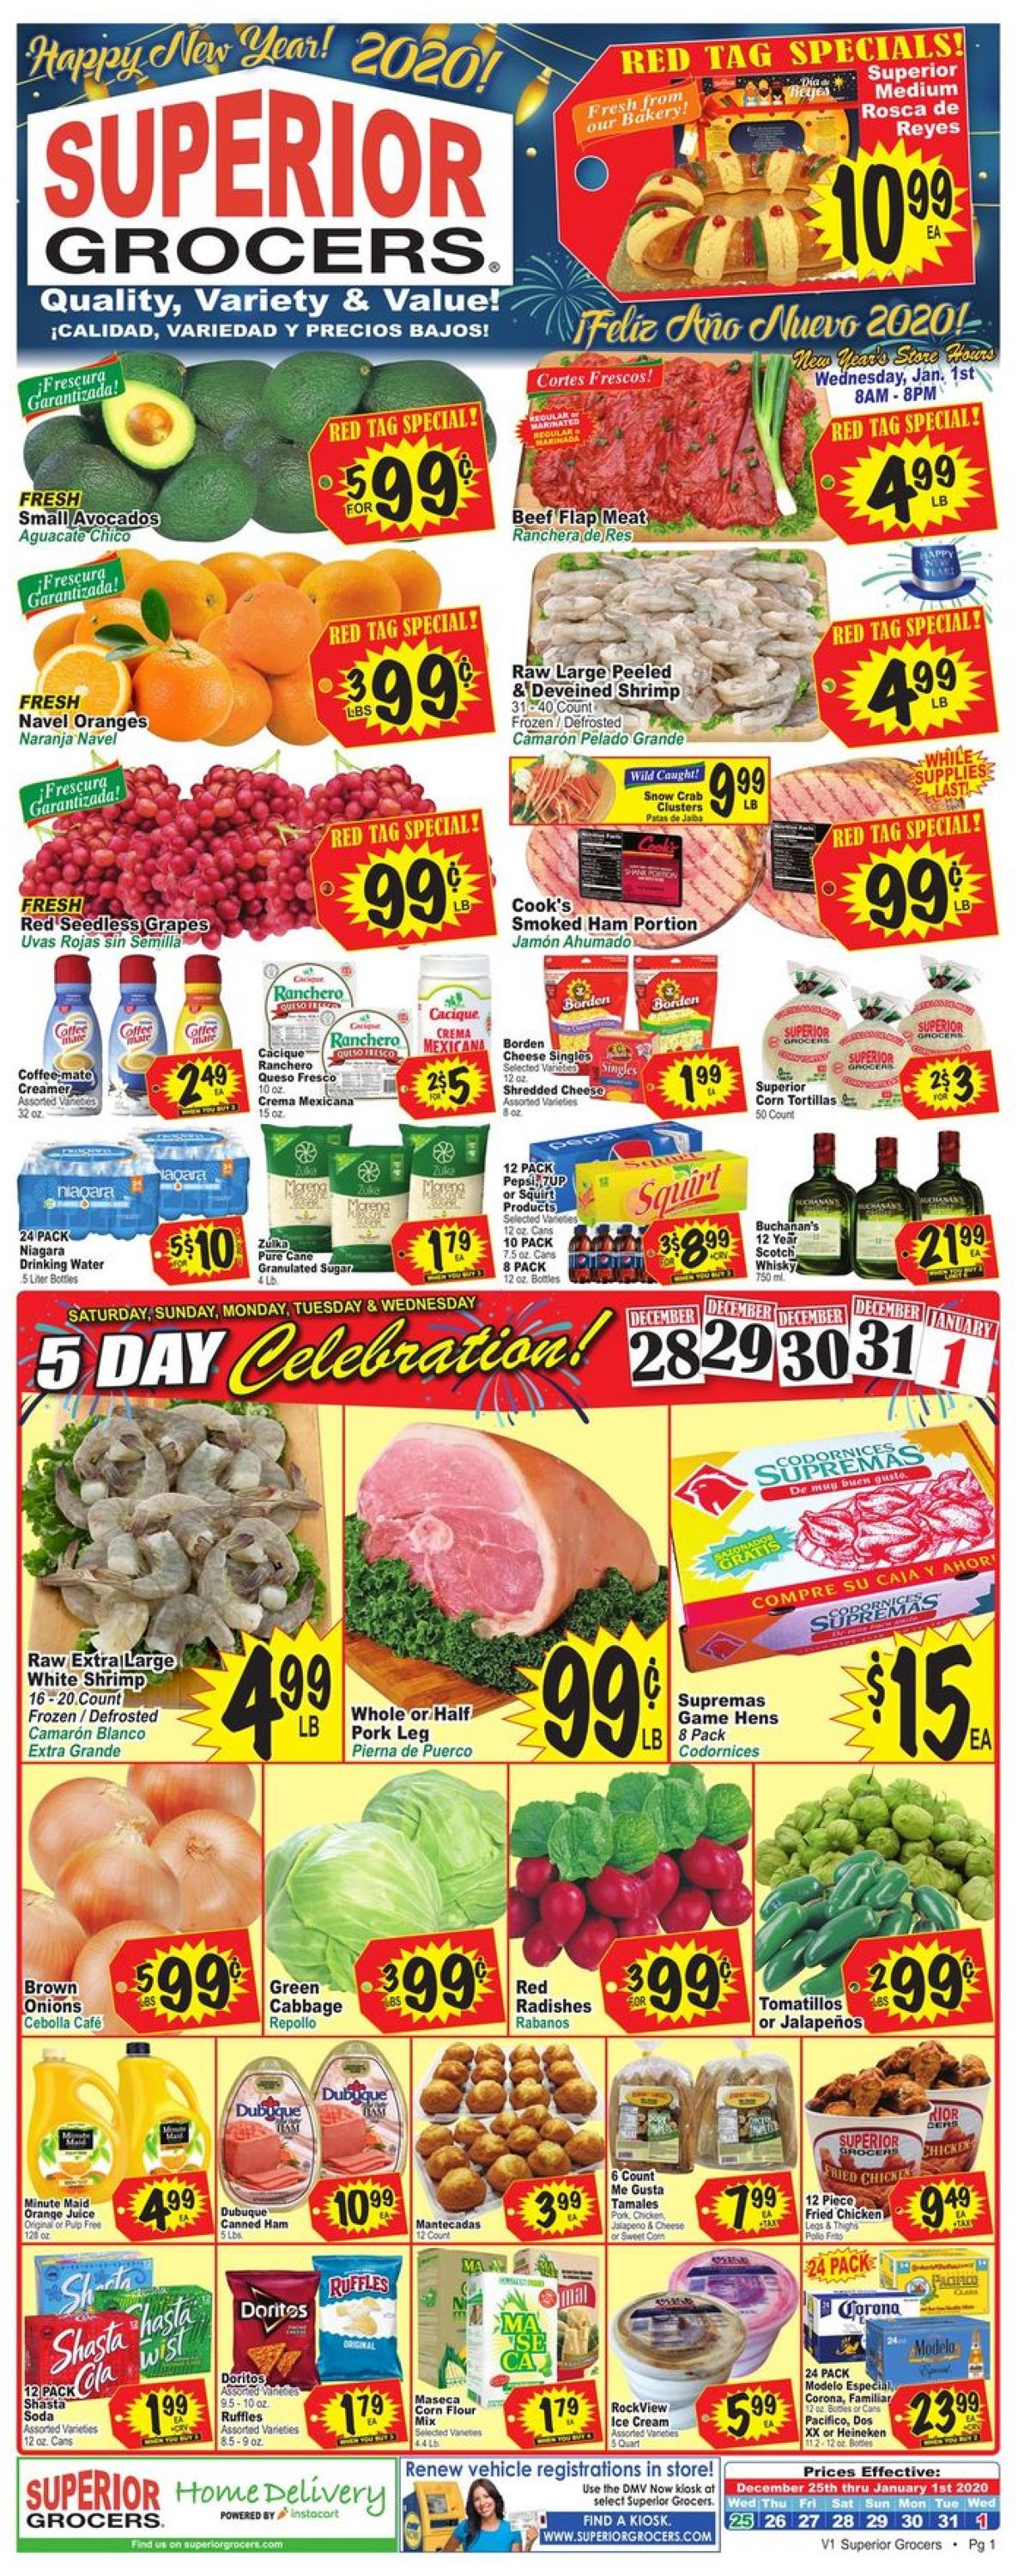 Superior Grocers - New Year's Ad 2019/2020 Weekly Ad Circular - valid 12/25-01/01/2020